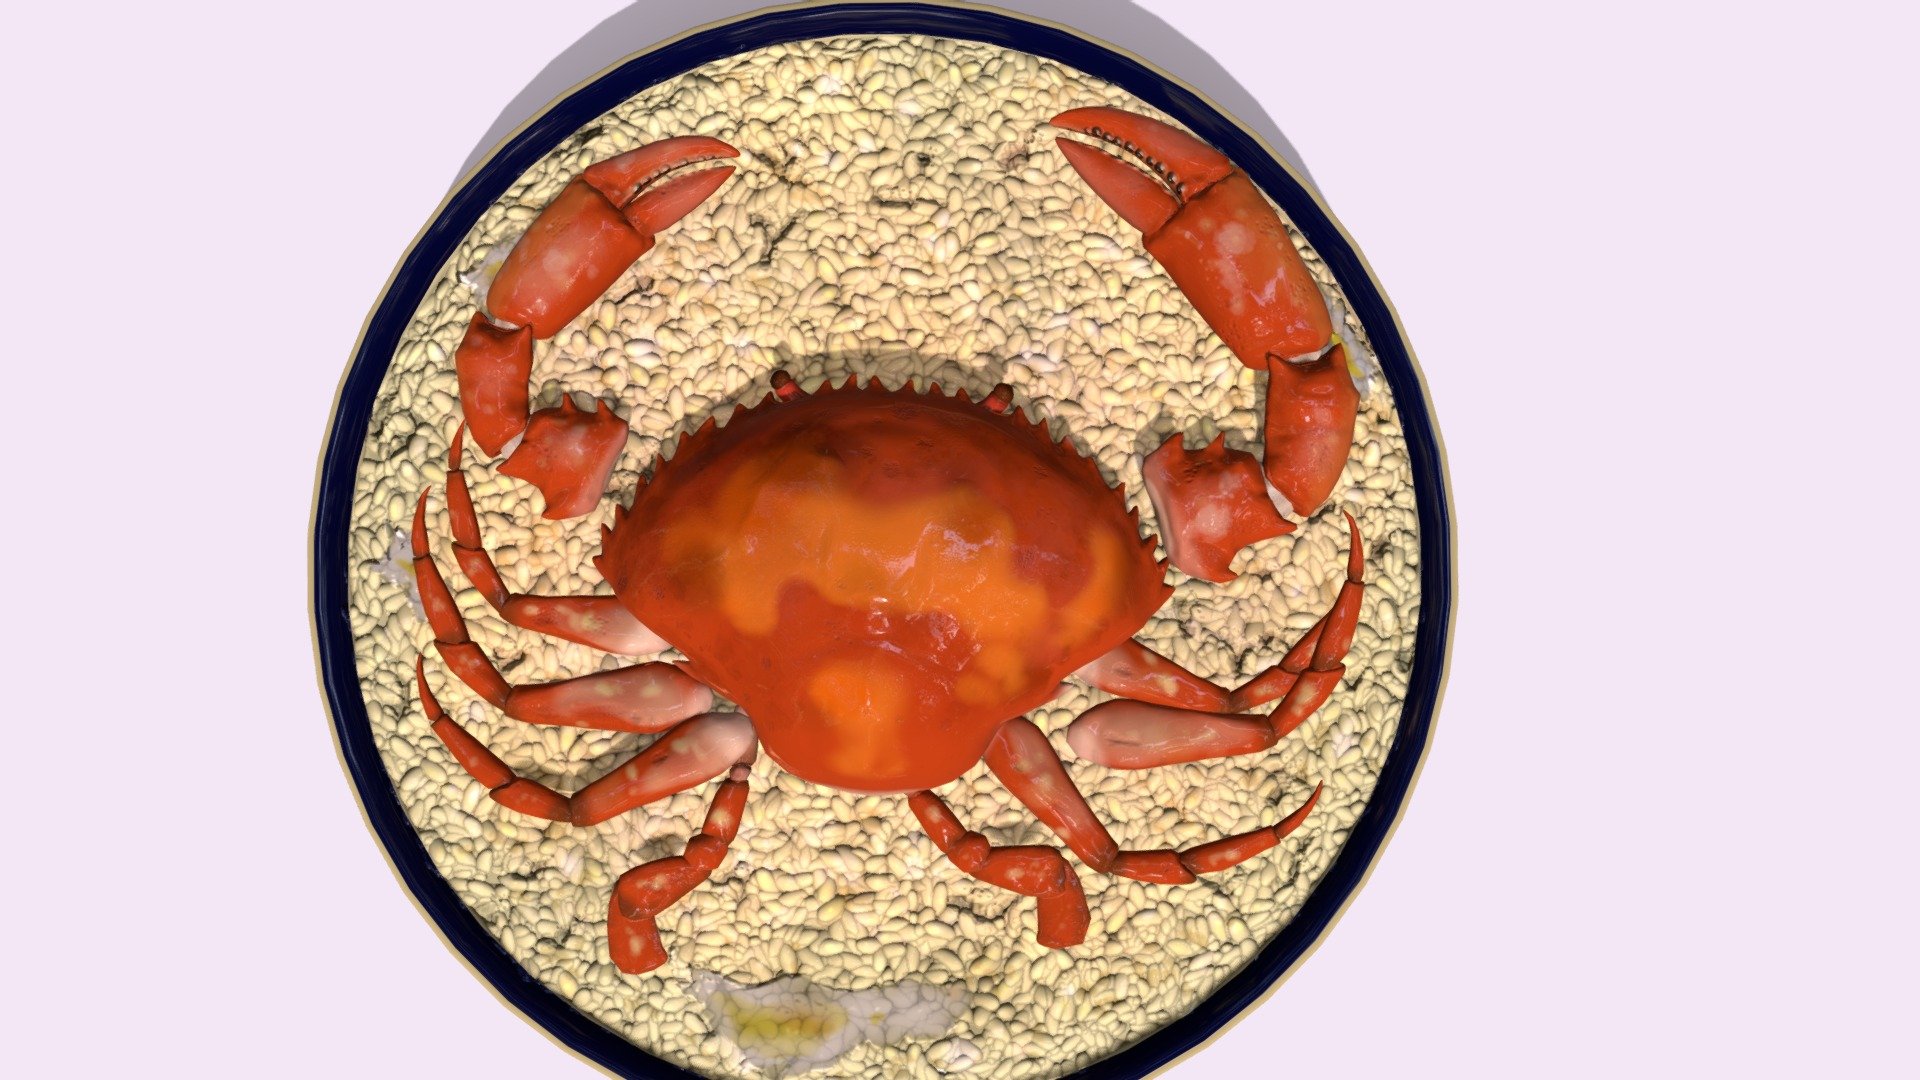 Hi~ It is a Asia food_Crab Rice

It has 7776 Polys and 8080 Vertex.
It can be used in game,VR,AR,CG. 

It have 4 pics.

2048*2048 size

Albedo1
Ao1
MetallicSmoothness1
Normal1

Display pics use Substance painter to render.

I hope you like it~

Thank you.If you have any question , please tell me 3d model